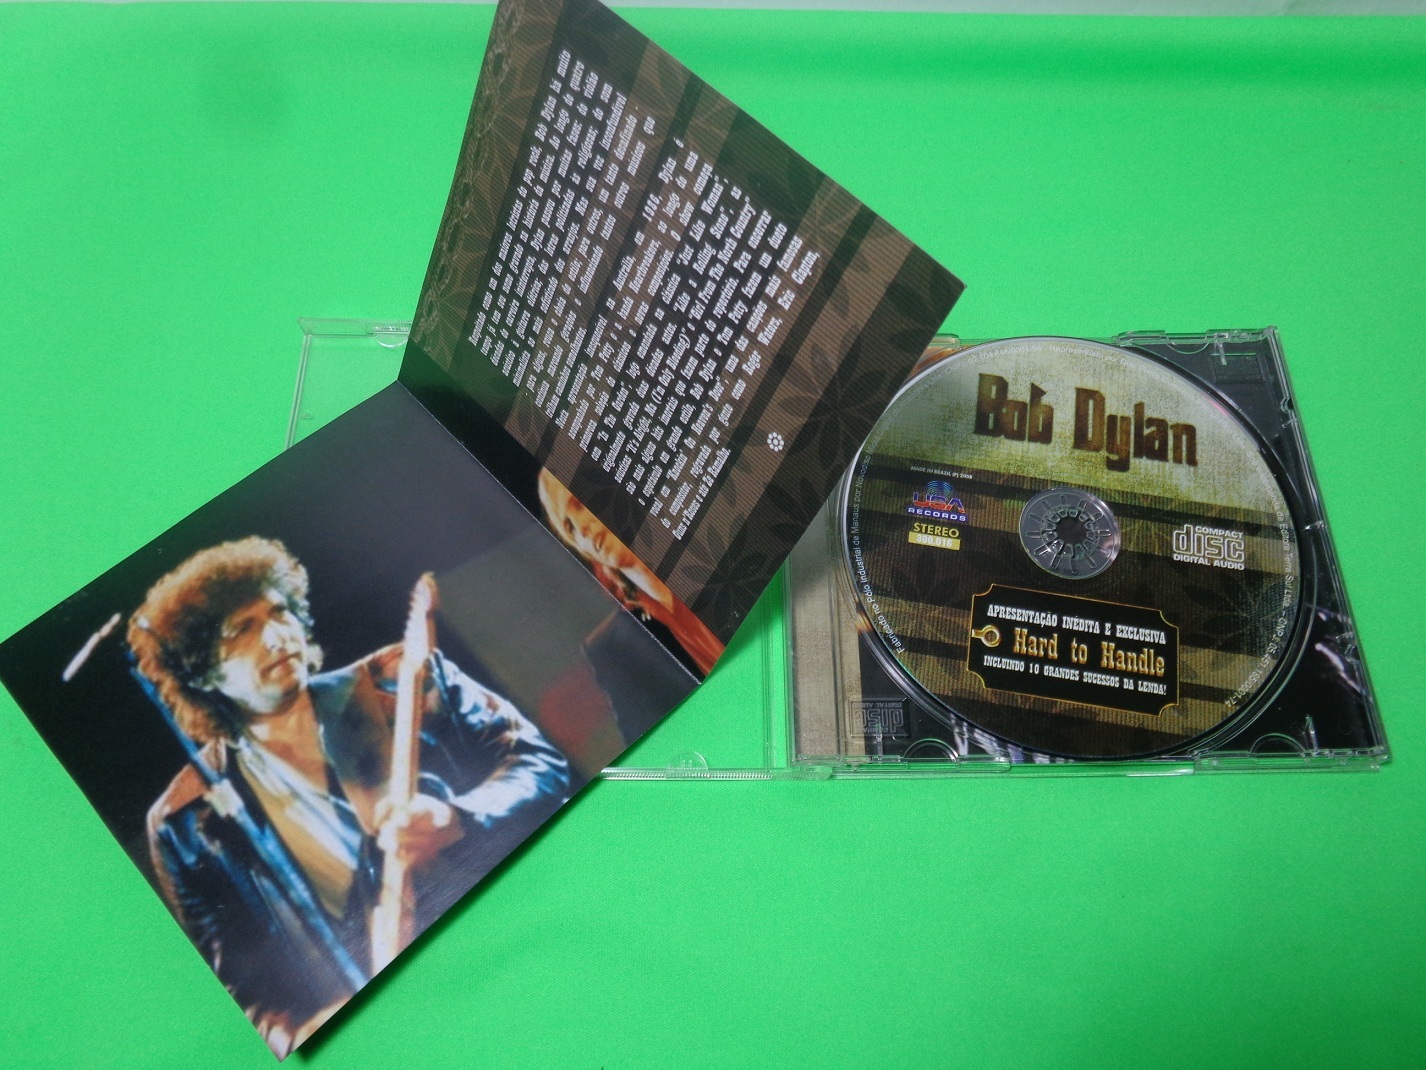 CD - Bob Dylan with Tom Petty and the Heartbreakers - Hard to Handle